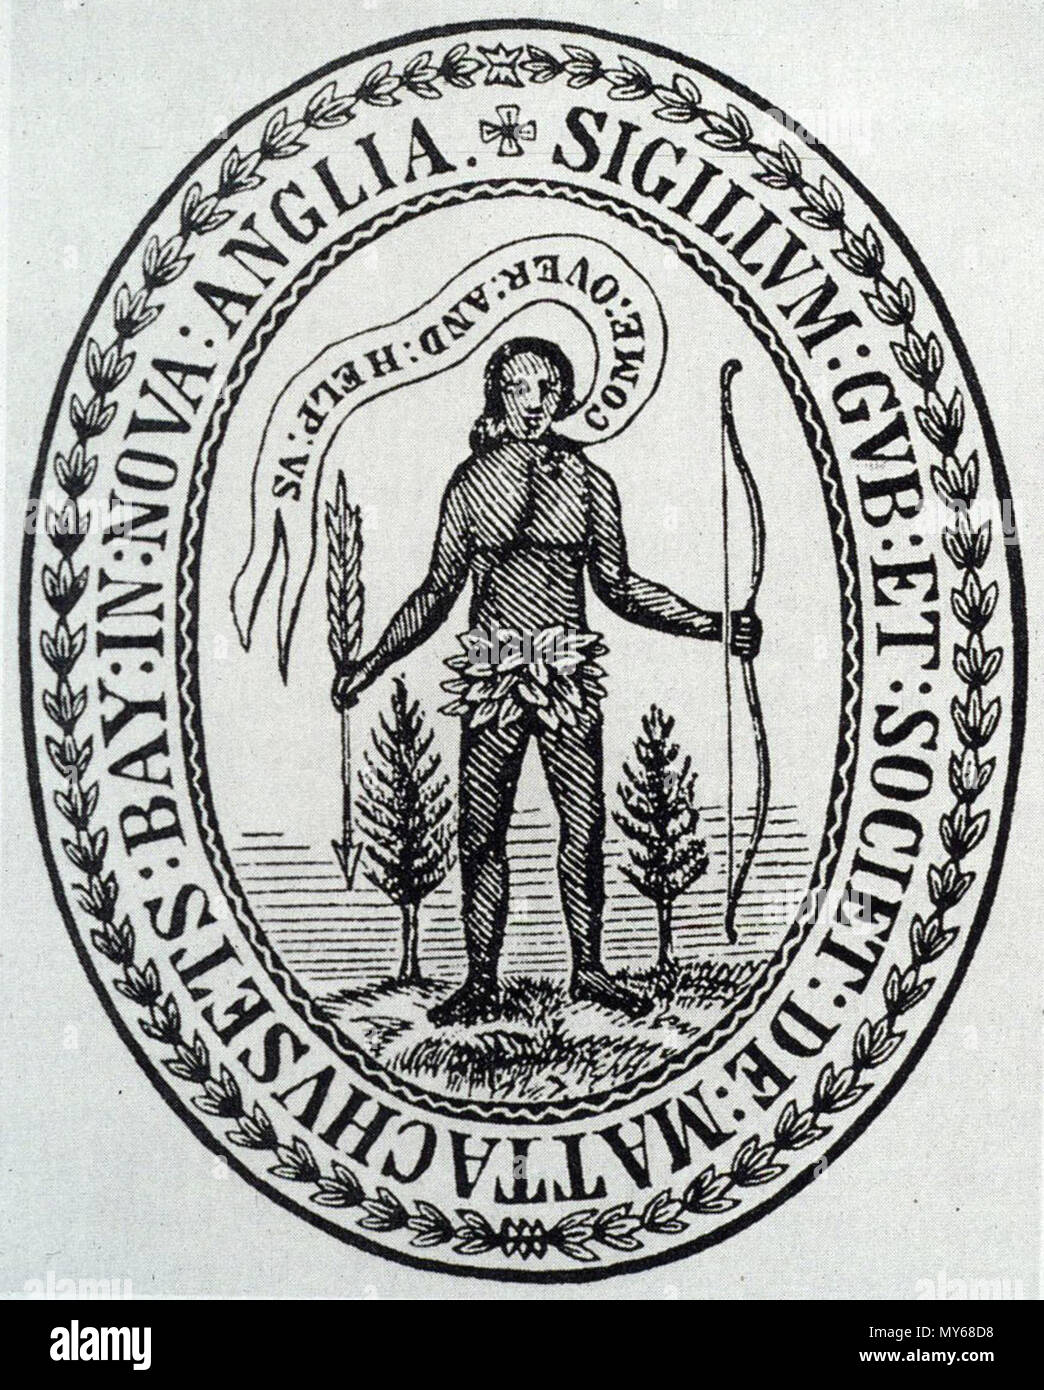 . English: Massachusetts Seal: In 1629, King Charles I granted a charter to the Massachusetts Bay Colony, which included the authority to make and use a seal. It featured an Indian holding an arrow pointed down in a gesture of peace, and the unlikely words 'Come over and help us,' emphasizing the missionary and commercial intentions of the original colonists. 28 November 2012, 06:28:08. Unknown 353 Massachusetts Bay Colony Seal, 1629 Stock Photo